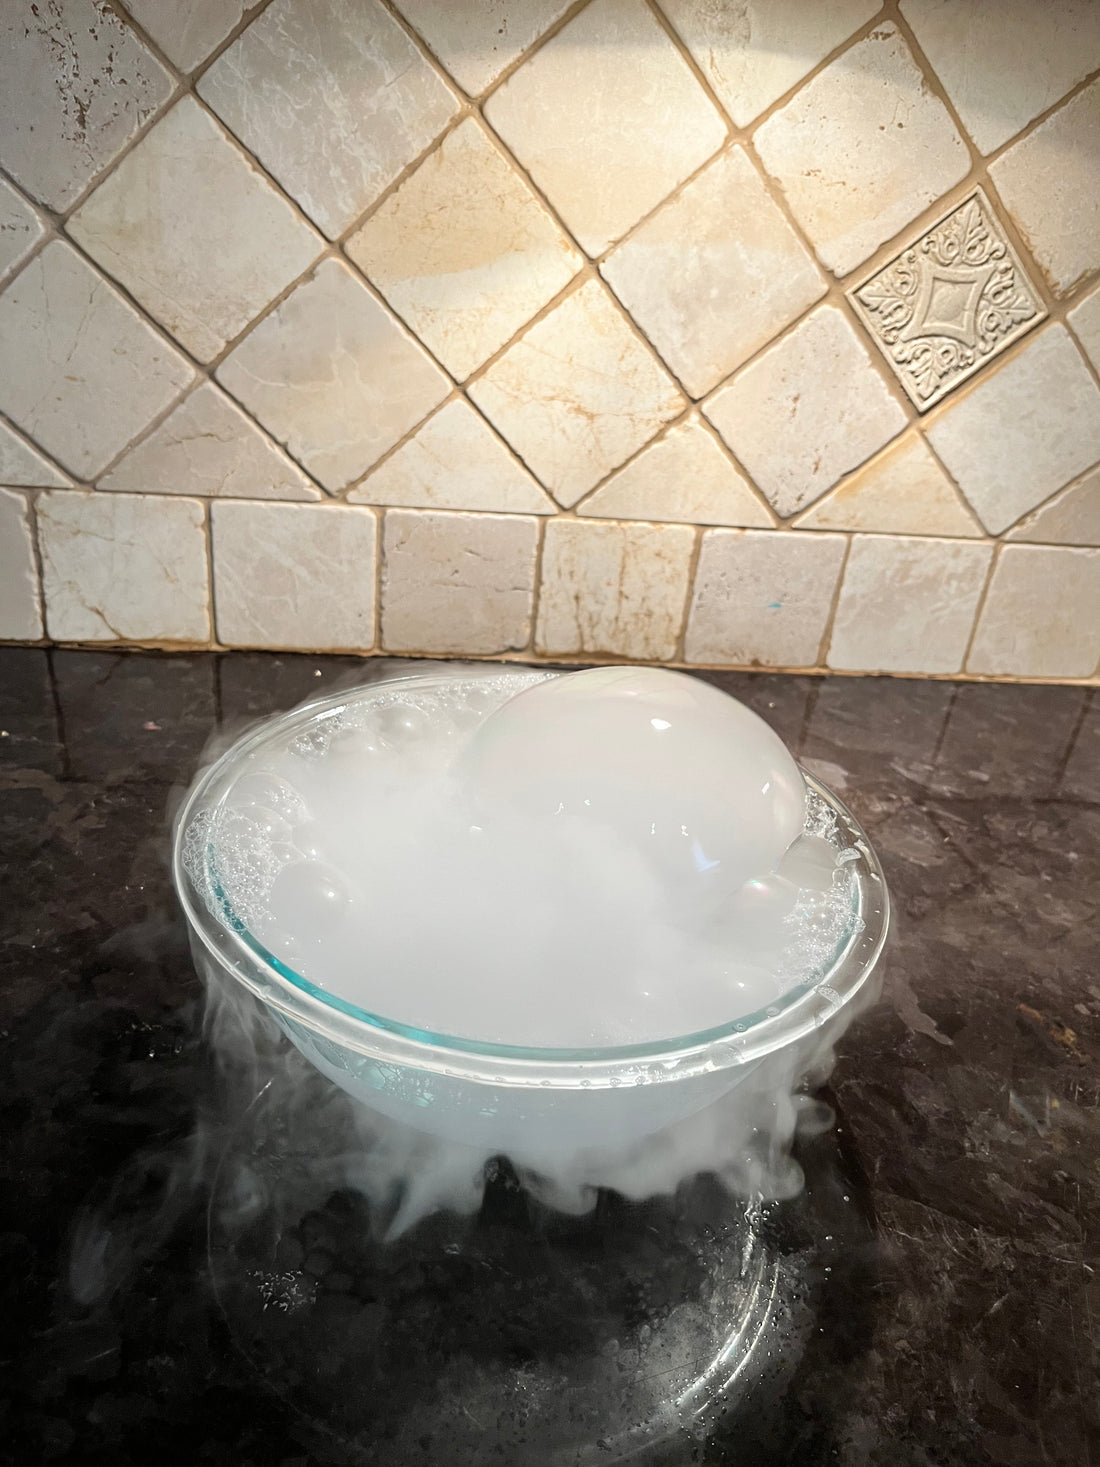 Bubble Blast: Unleashing the Magic of Dry Ice and Dish Soap for an Epic Kids' Science Experiment